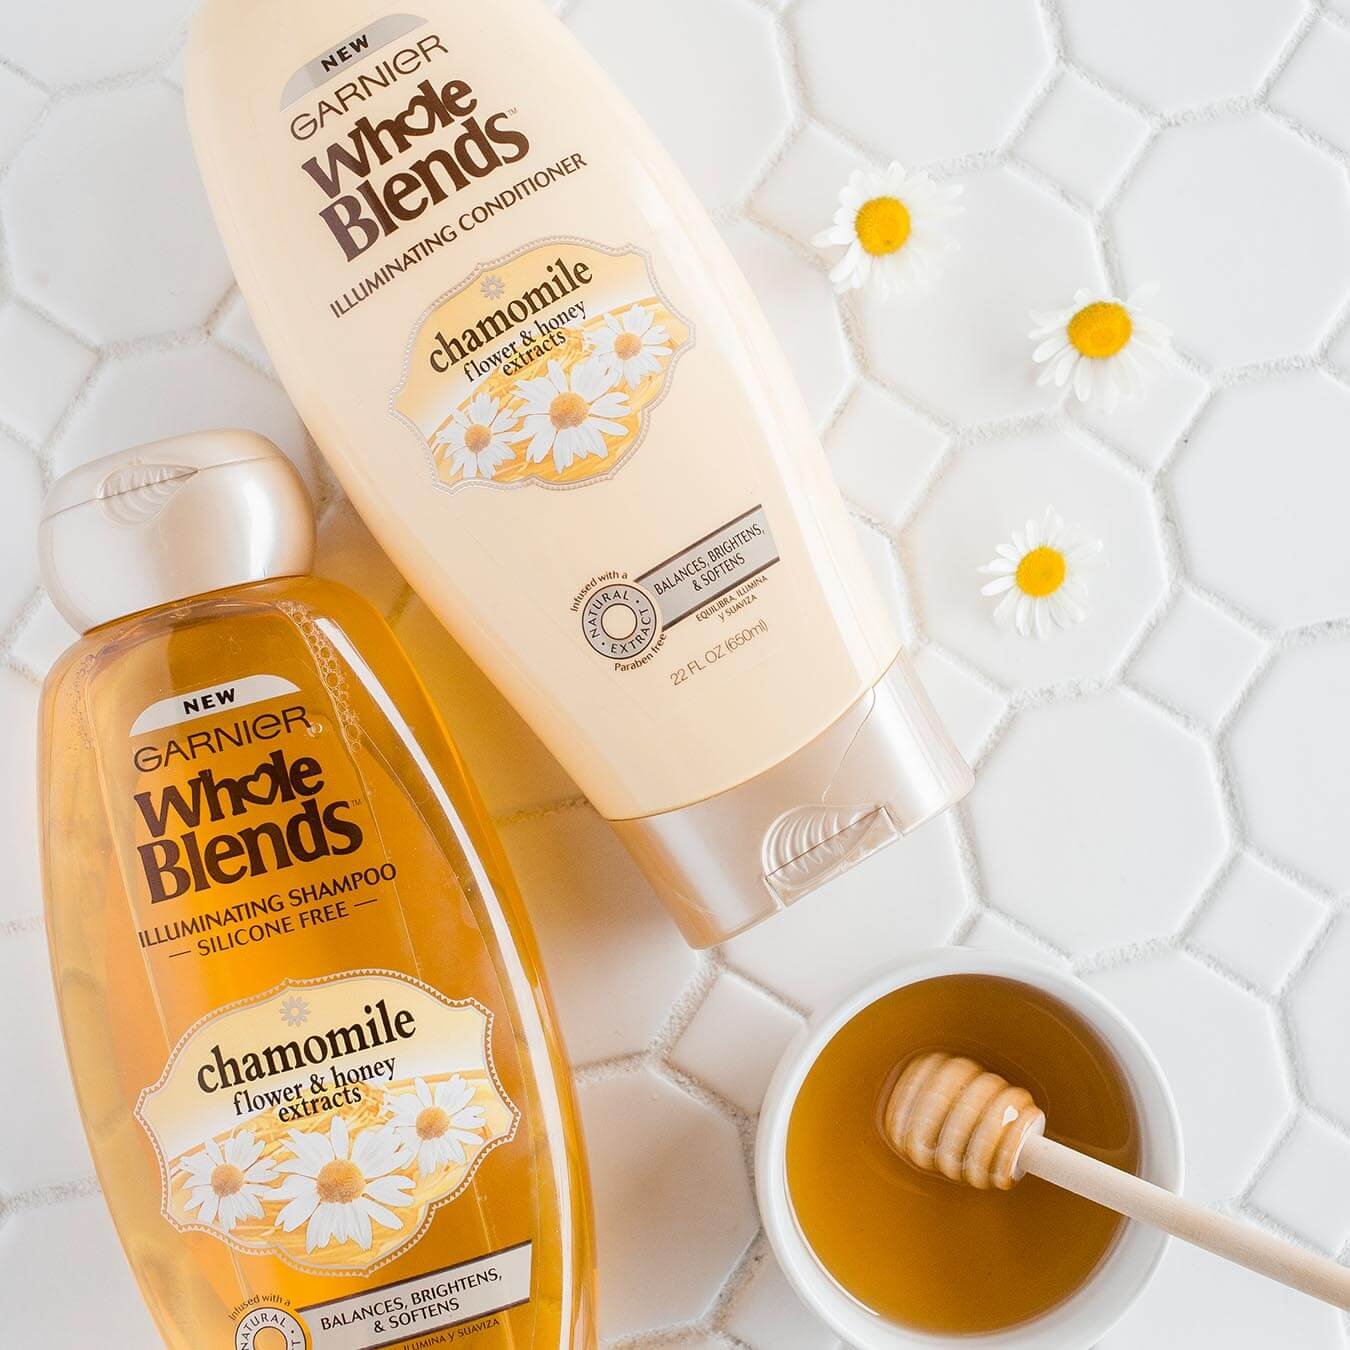 Whole Blends Chamomile Illuminating Shampoo with Flower and Honey Extracts and Chamomile Illuminating Conditioner with Flower and Honey Extracts on a background of octagonal and diamond tiles strew with daisy blossoms and a ramekin of honey with a honey dipper.